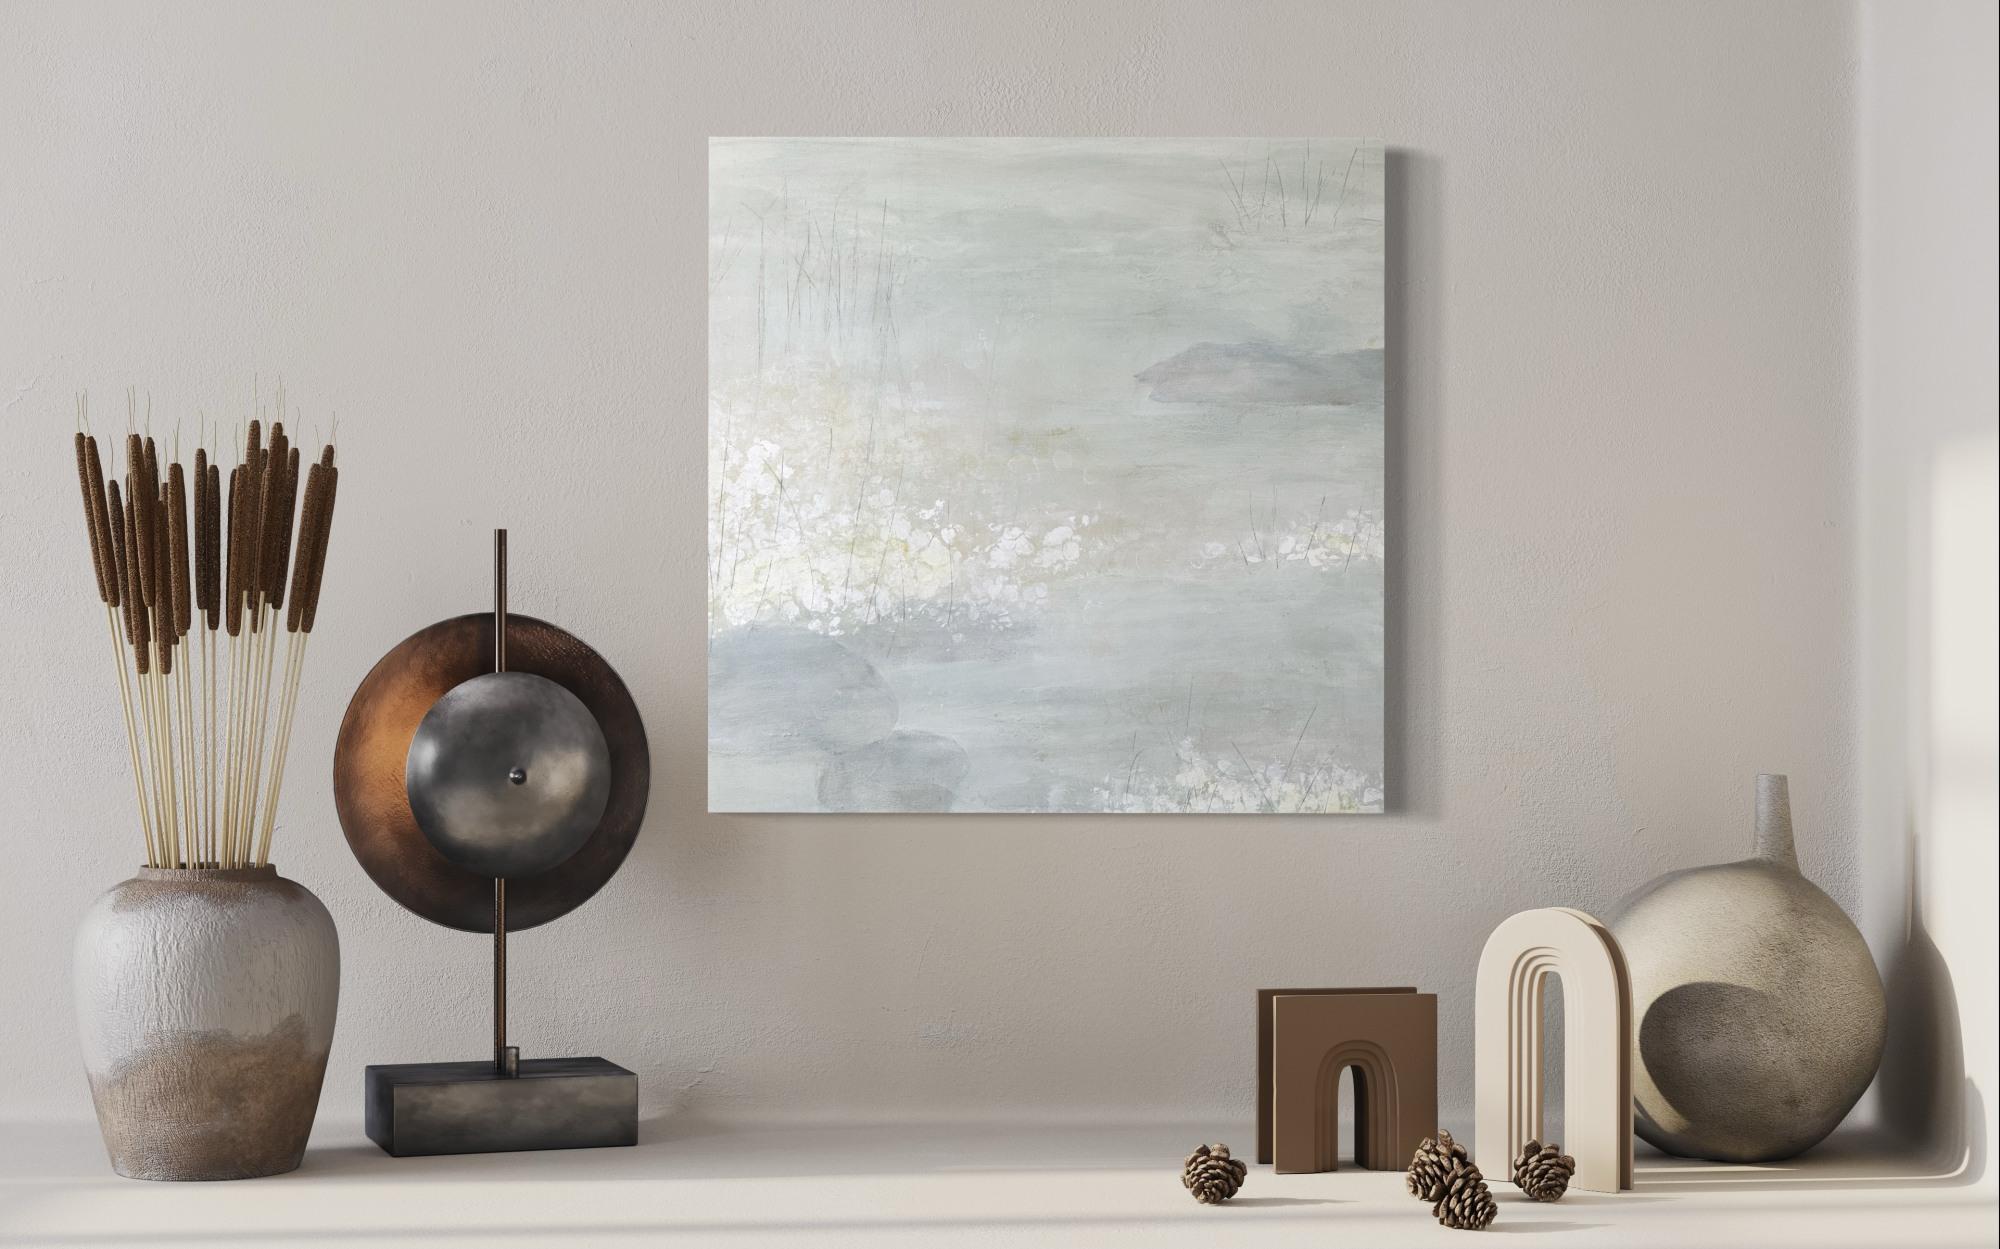 The Pond in February 4, lily pond, neutral, soft art - Gray Abstract Painting by Juanita Bellavance 